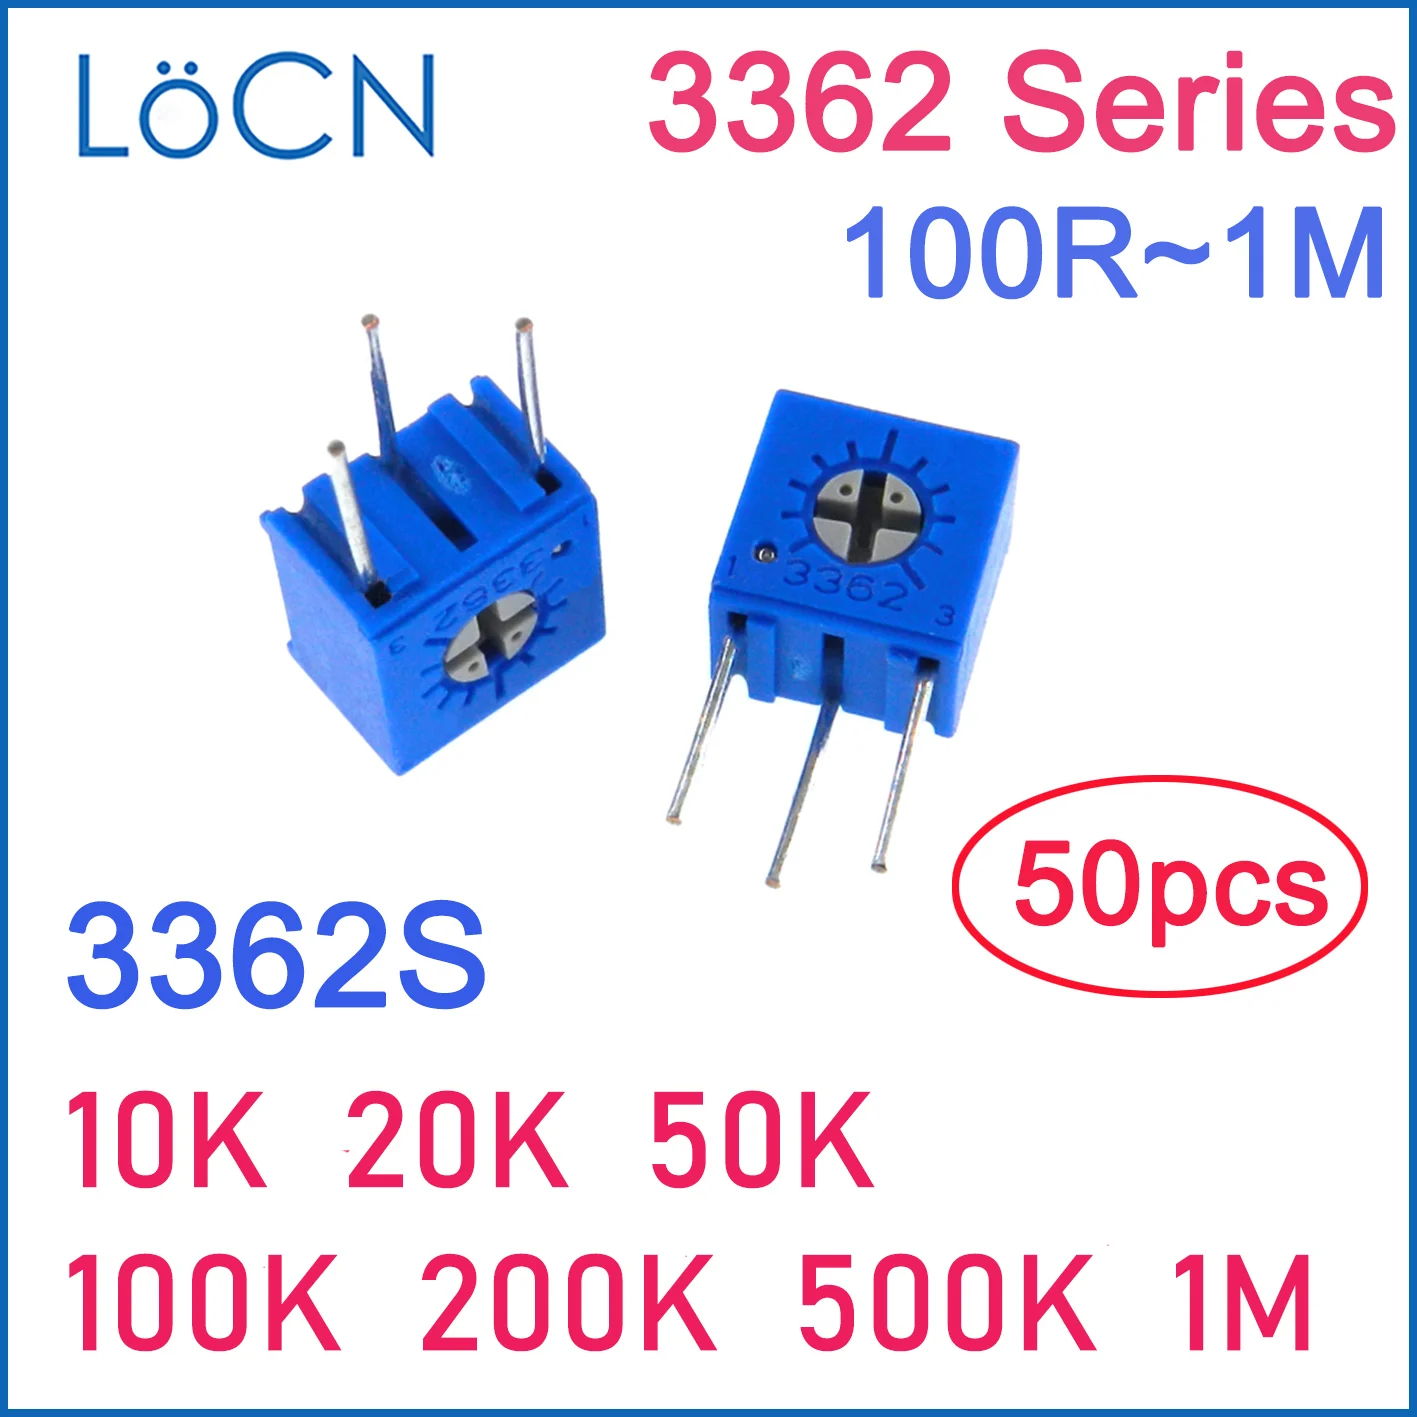 

LoCN 50PCS 3362S 10K 20K 50K 100K 200K 500K 1M Trim Pot Trimmer Potentiometer 3362 3362S-1-204 3362S-1-504 precise Variable